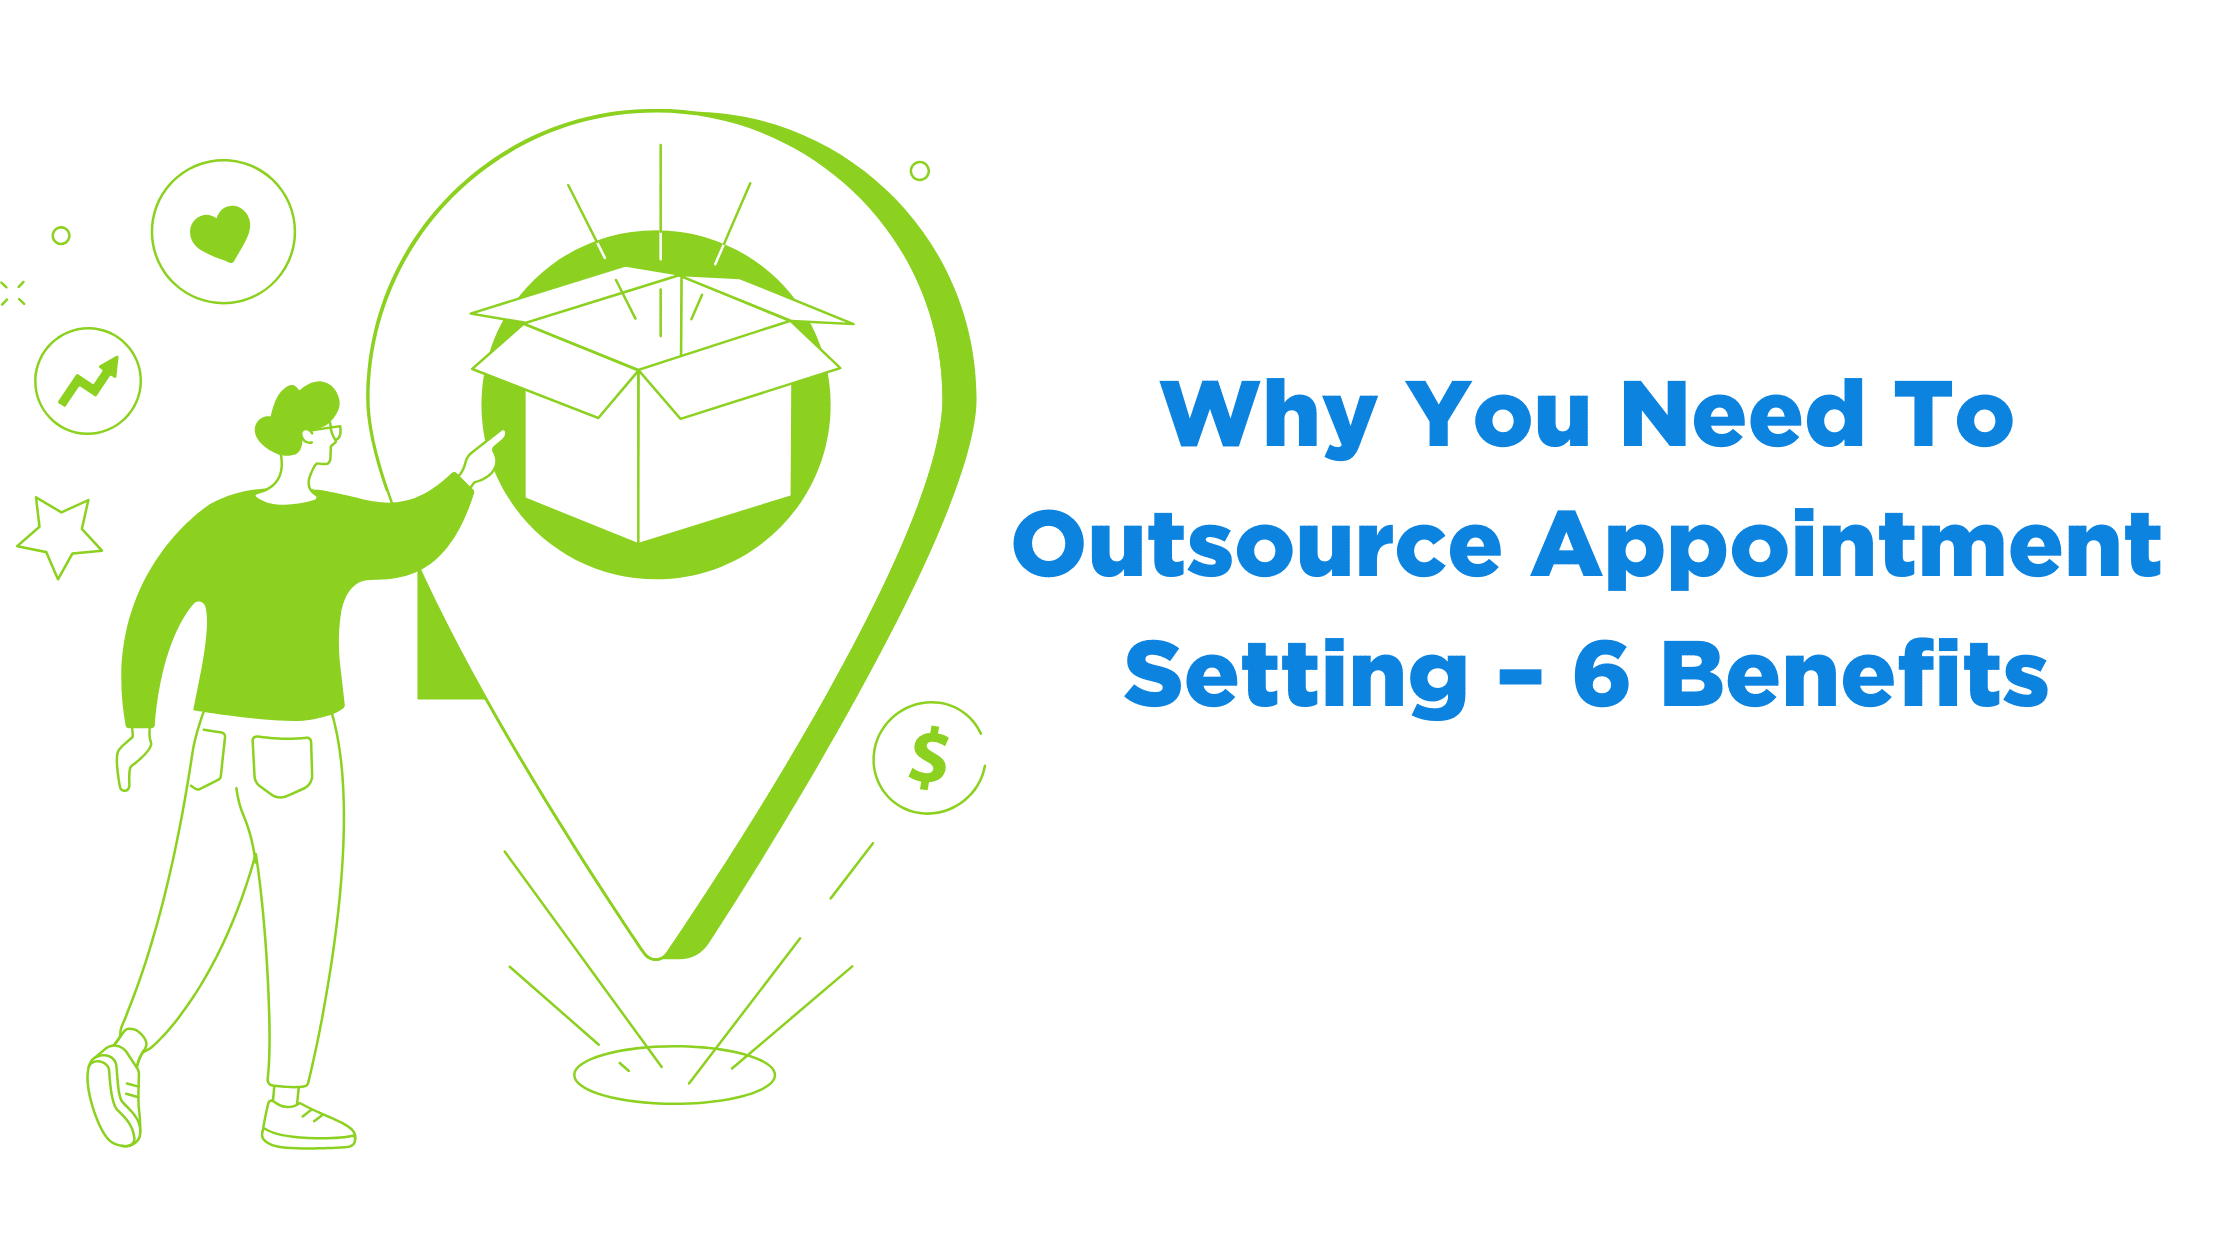 Why You Need To Outsource Appointment Setting – 6 Benefits